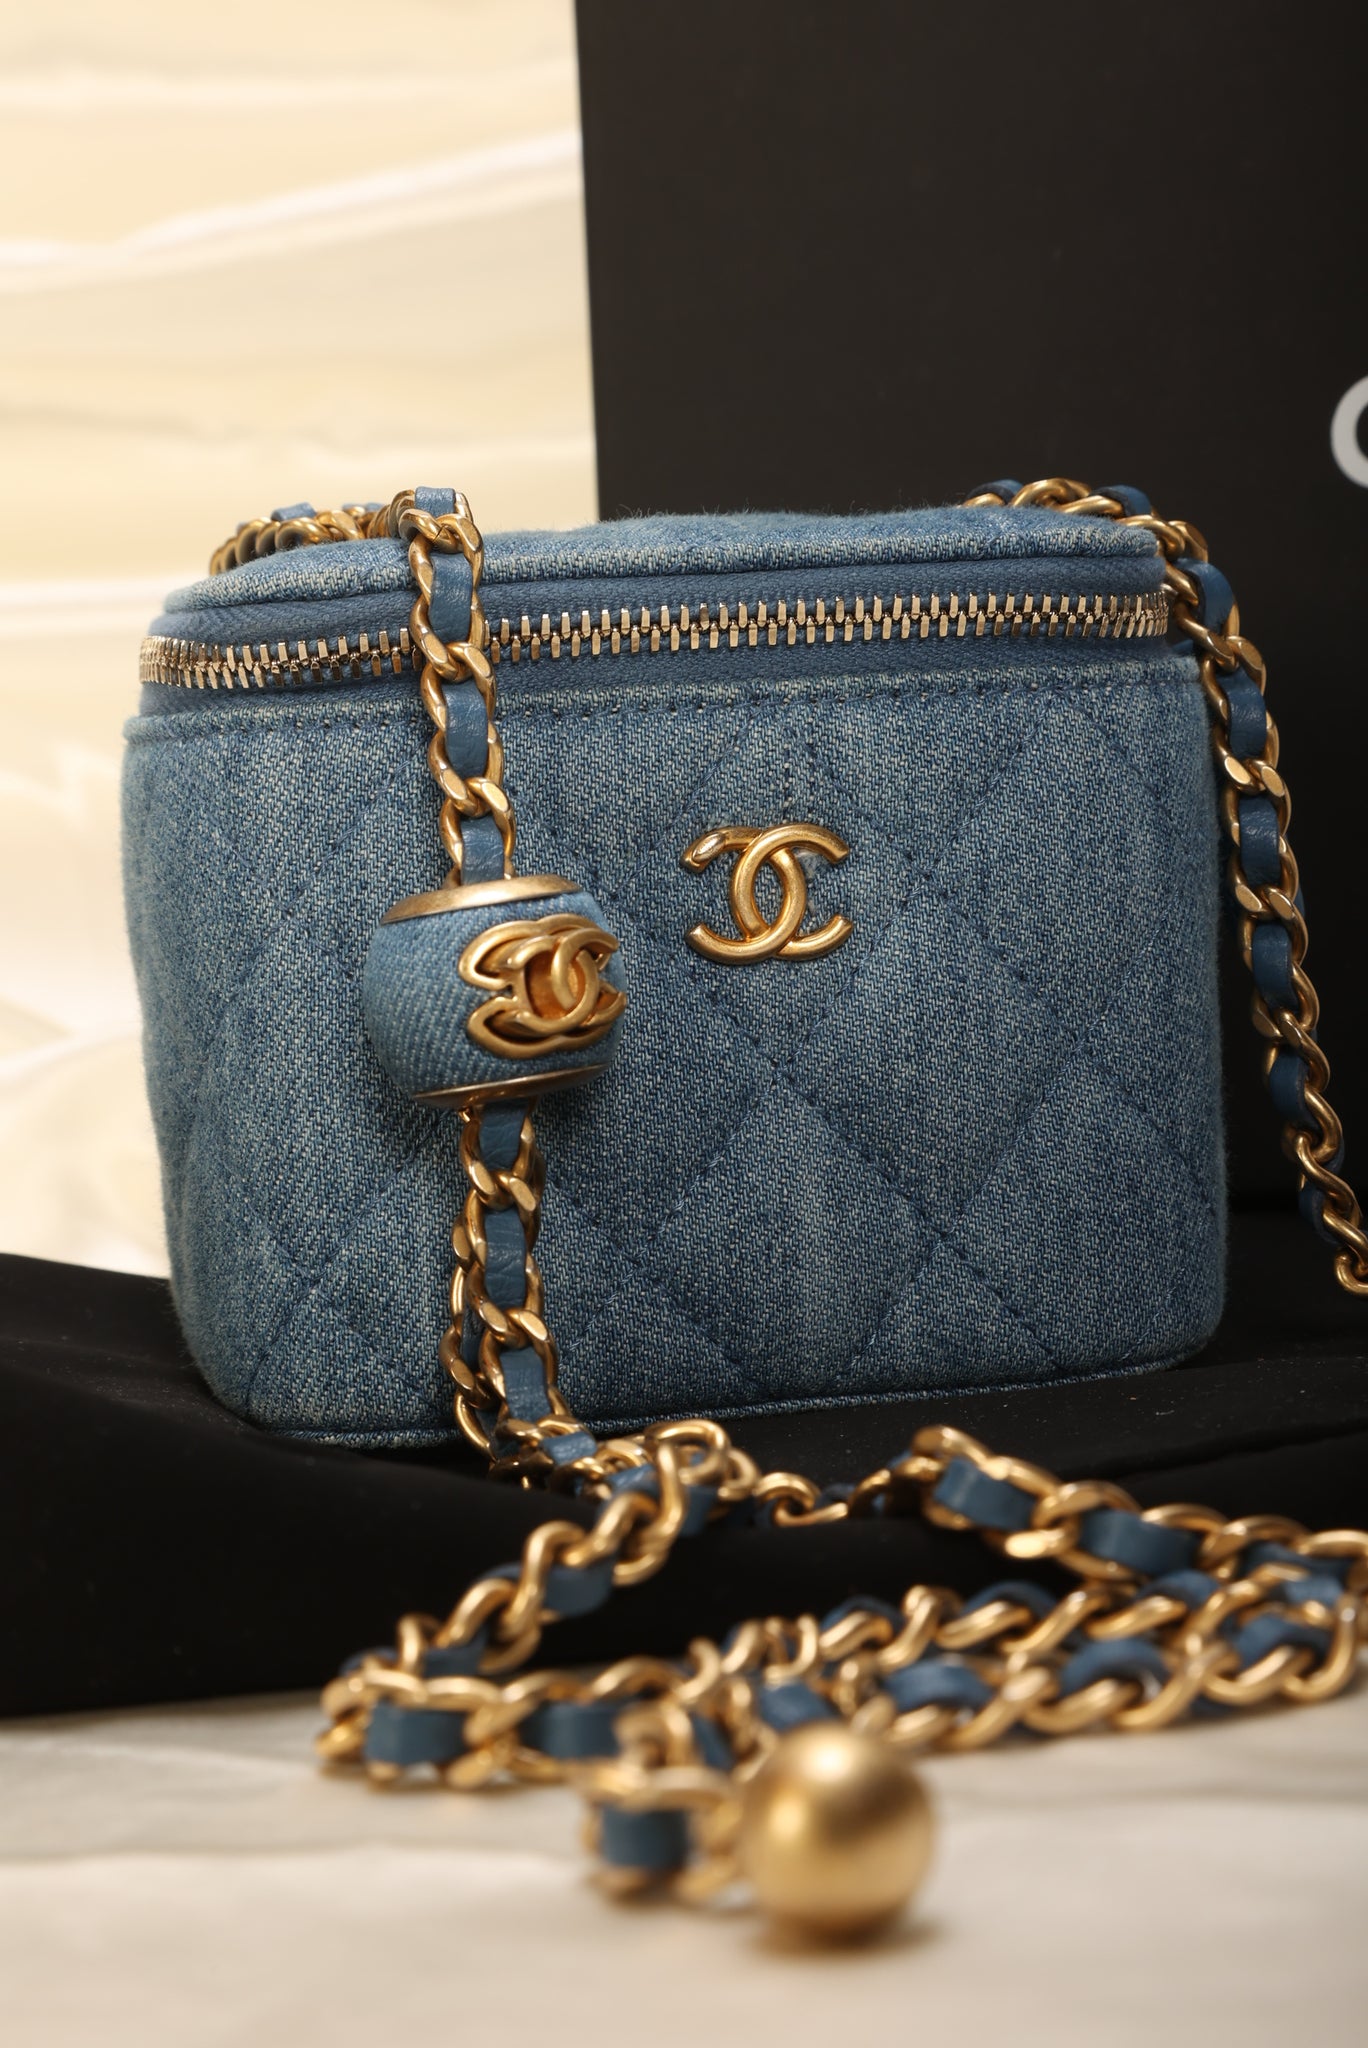 Complete Review of the Chanel Vanity Bag, Handbags and Accessories